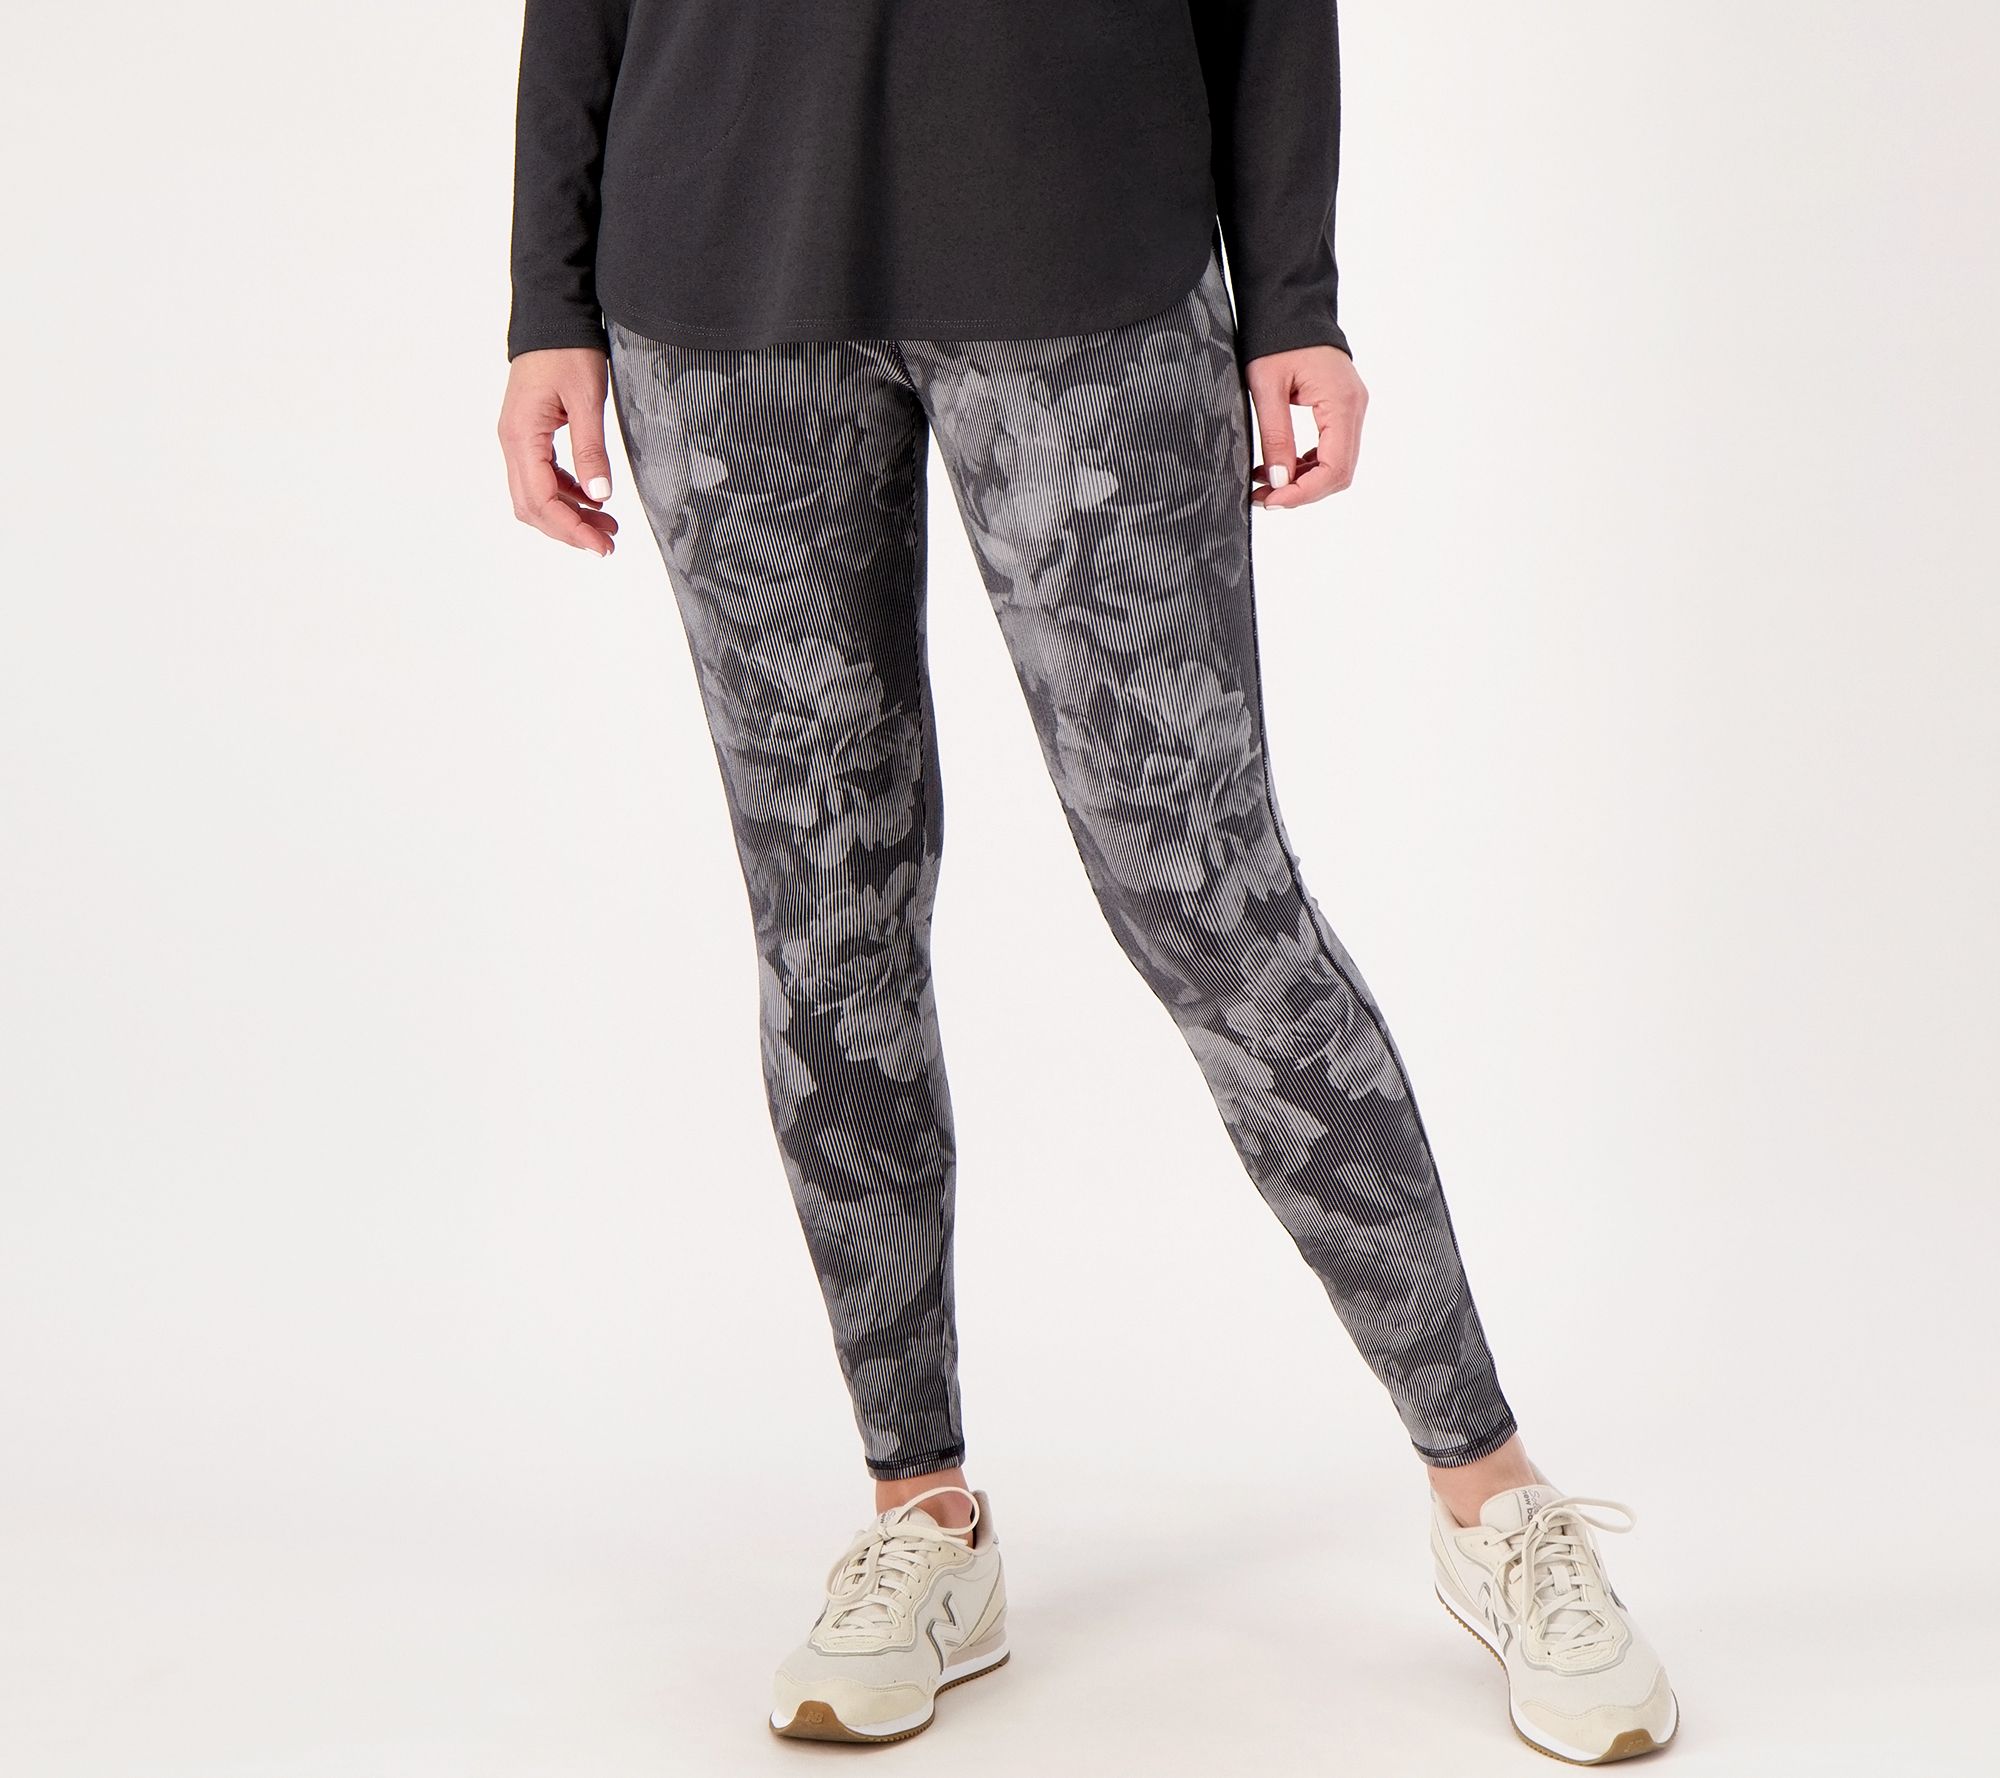 Denim & Co. Active Printed or Solid Duo Stretch Tall Pant w/ Pocket